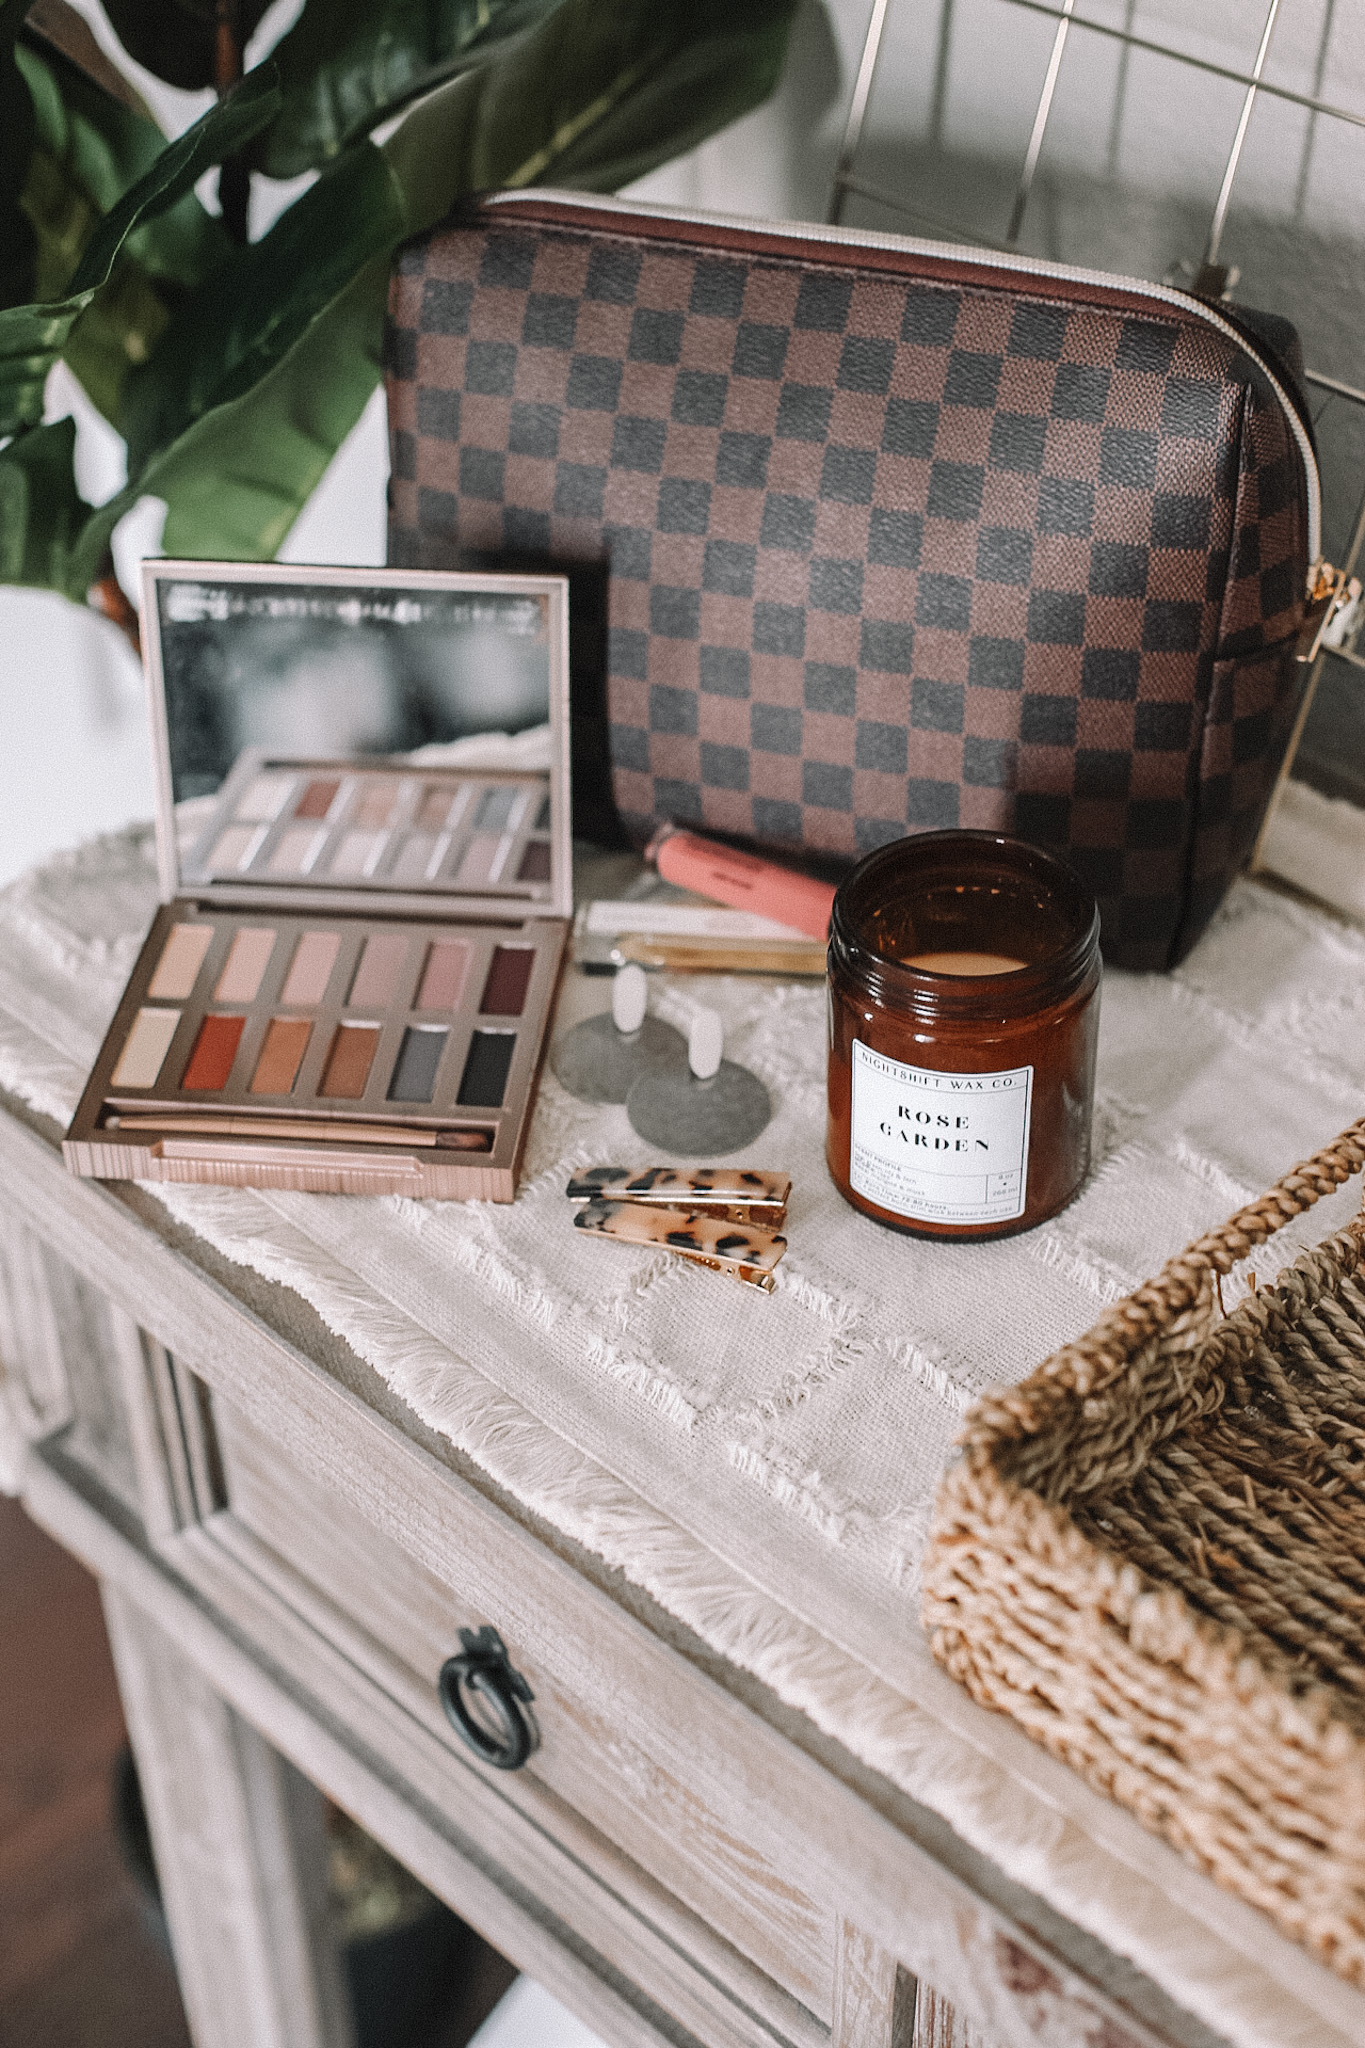 My Favorite Things This March 2020 | bareMinerals Gen Nude Patent Lip Lacquer | Kendra Scott Didi Statement Earrings in Silver | Toiletry Bags Cosmetic Hand Bag Travel Organizer Makeup Pouch Waterproof Train Case for Women | Affordable by Amanda shares her March favorites